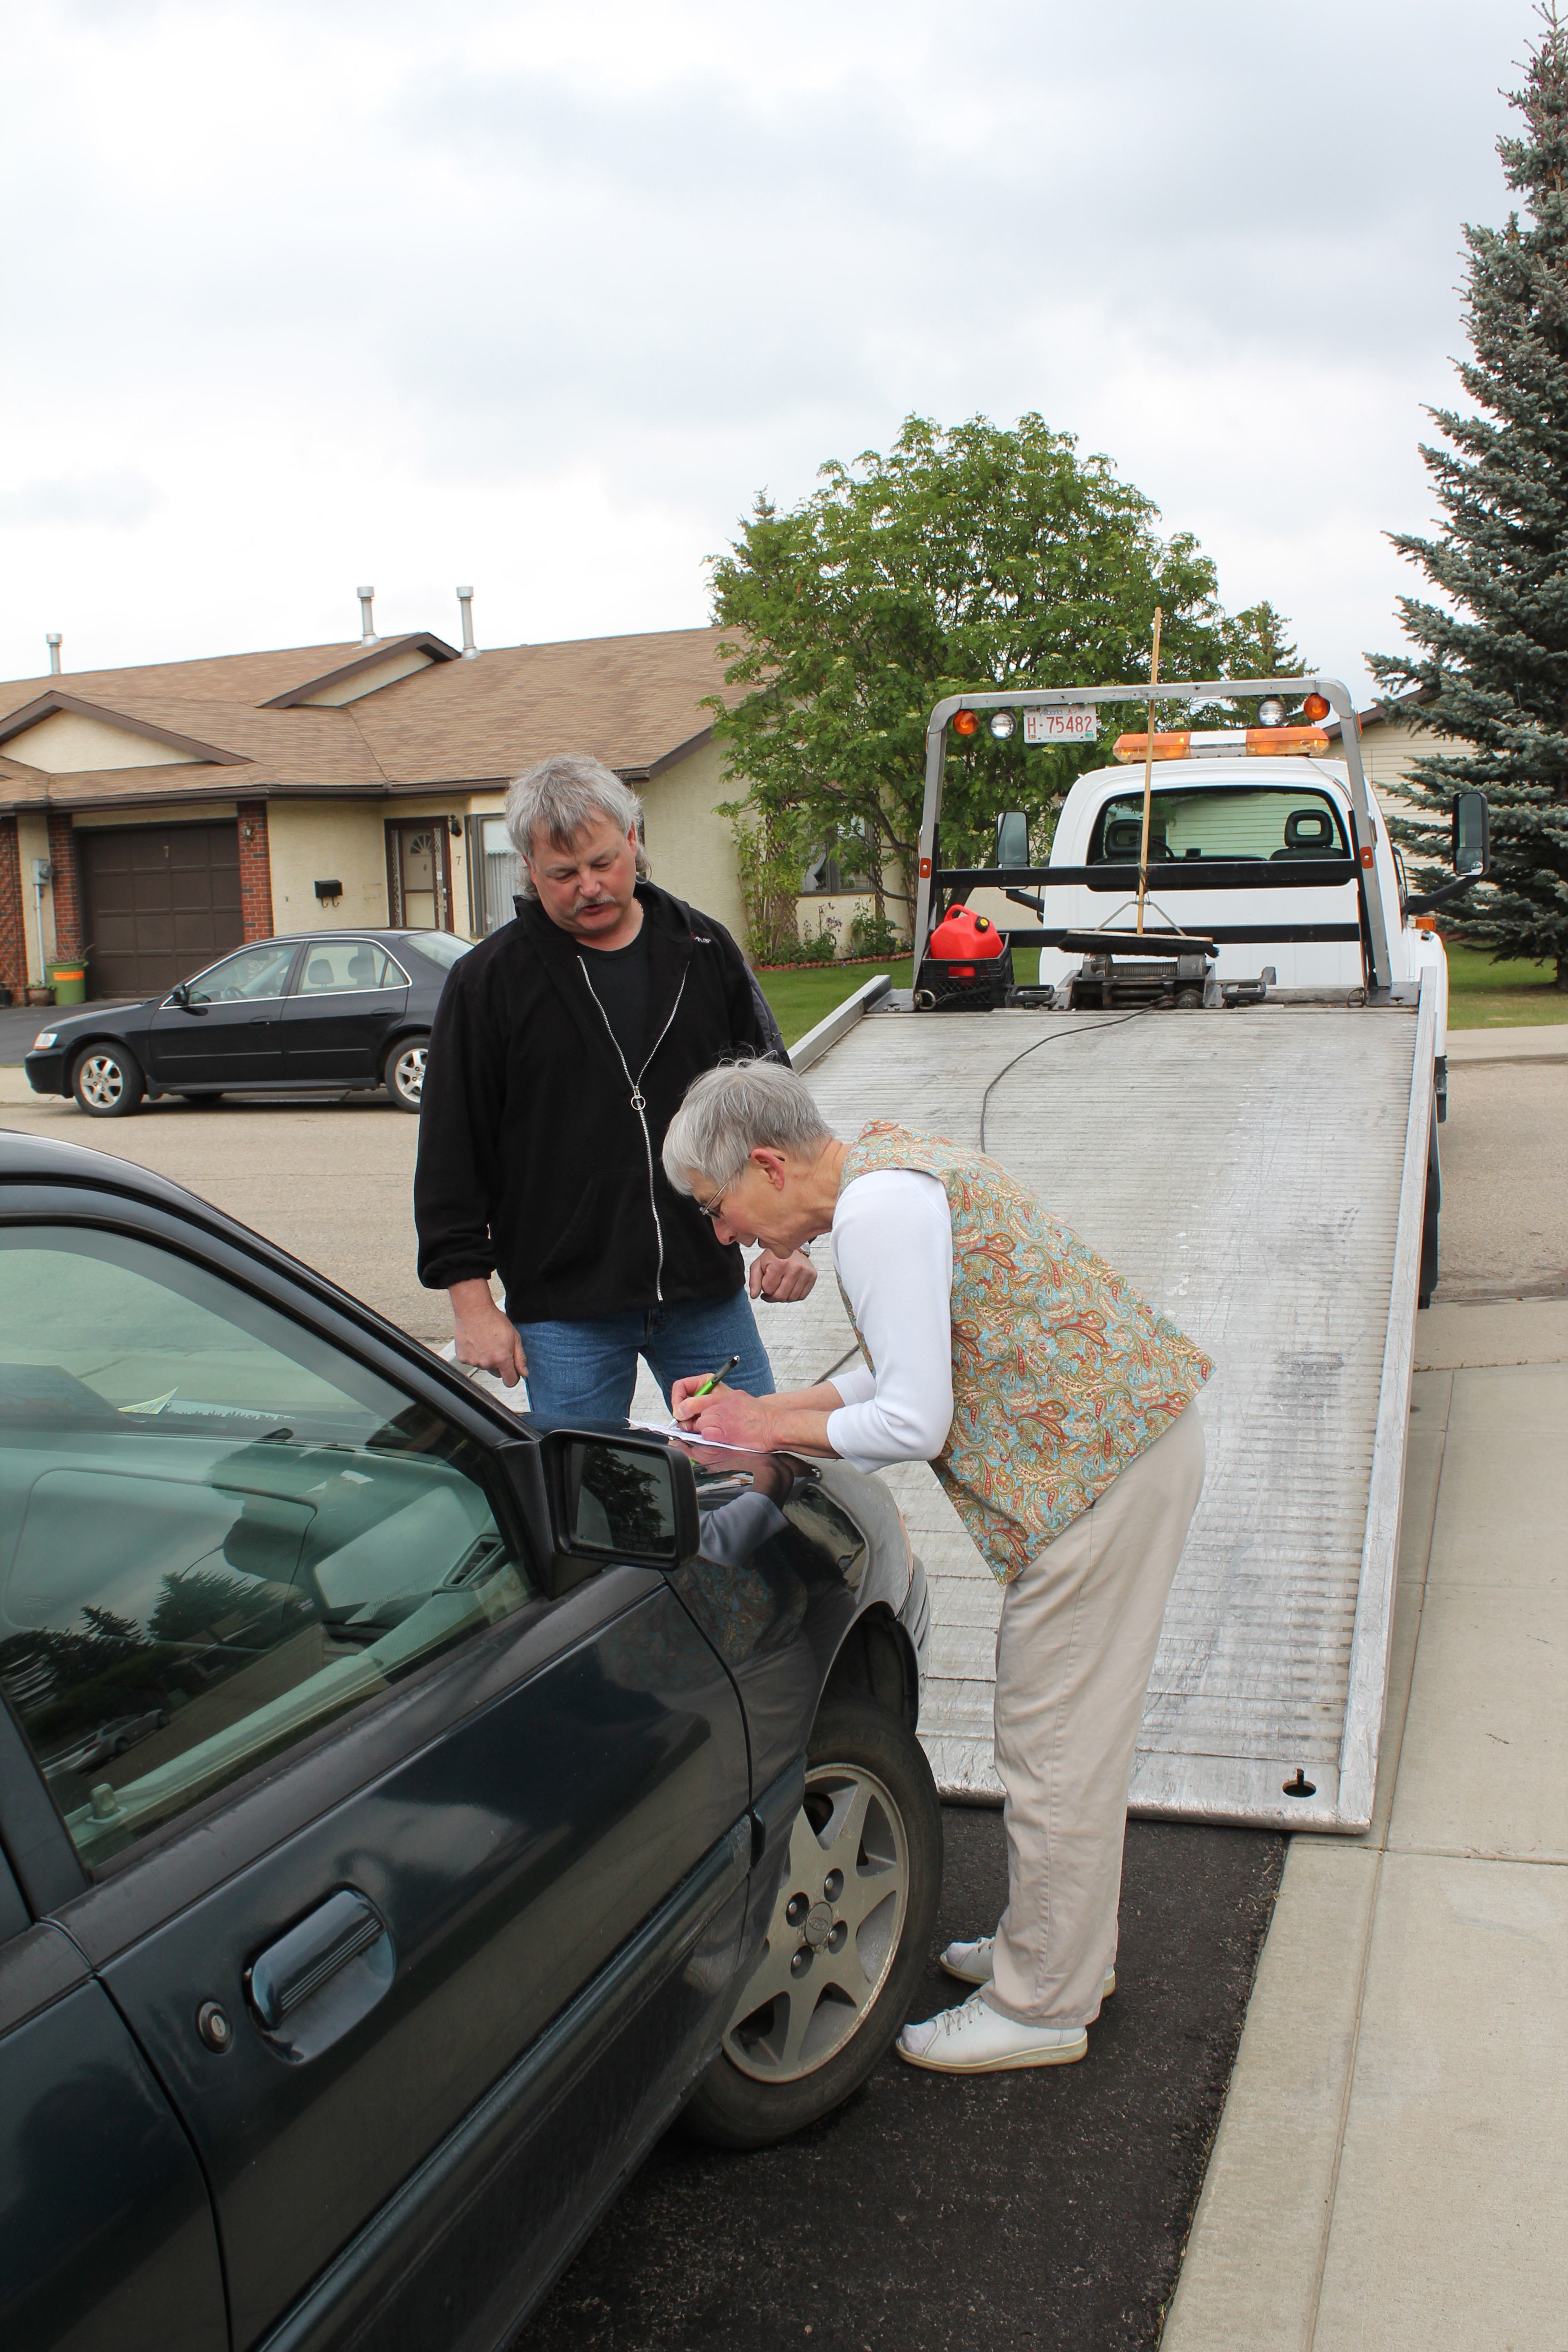 RIDE ON – A tow truck driver from DLJ’s Haulaway Ltd. watches as Rene Neumann signs her car over to him. Neumann is the first person to donate a vehicle to the Kidney Foundation here in Red Deer.